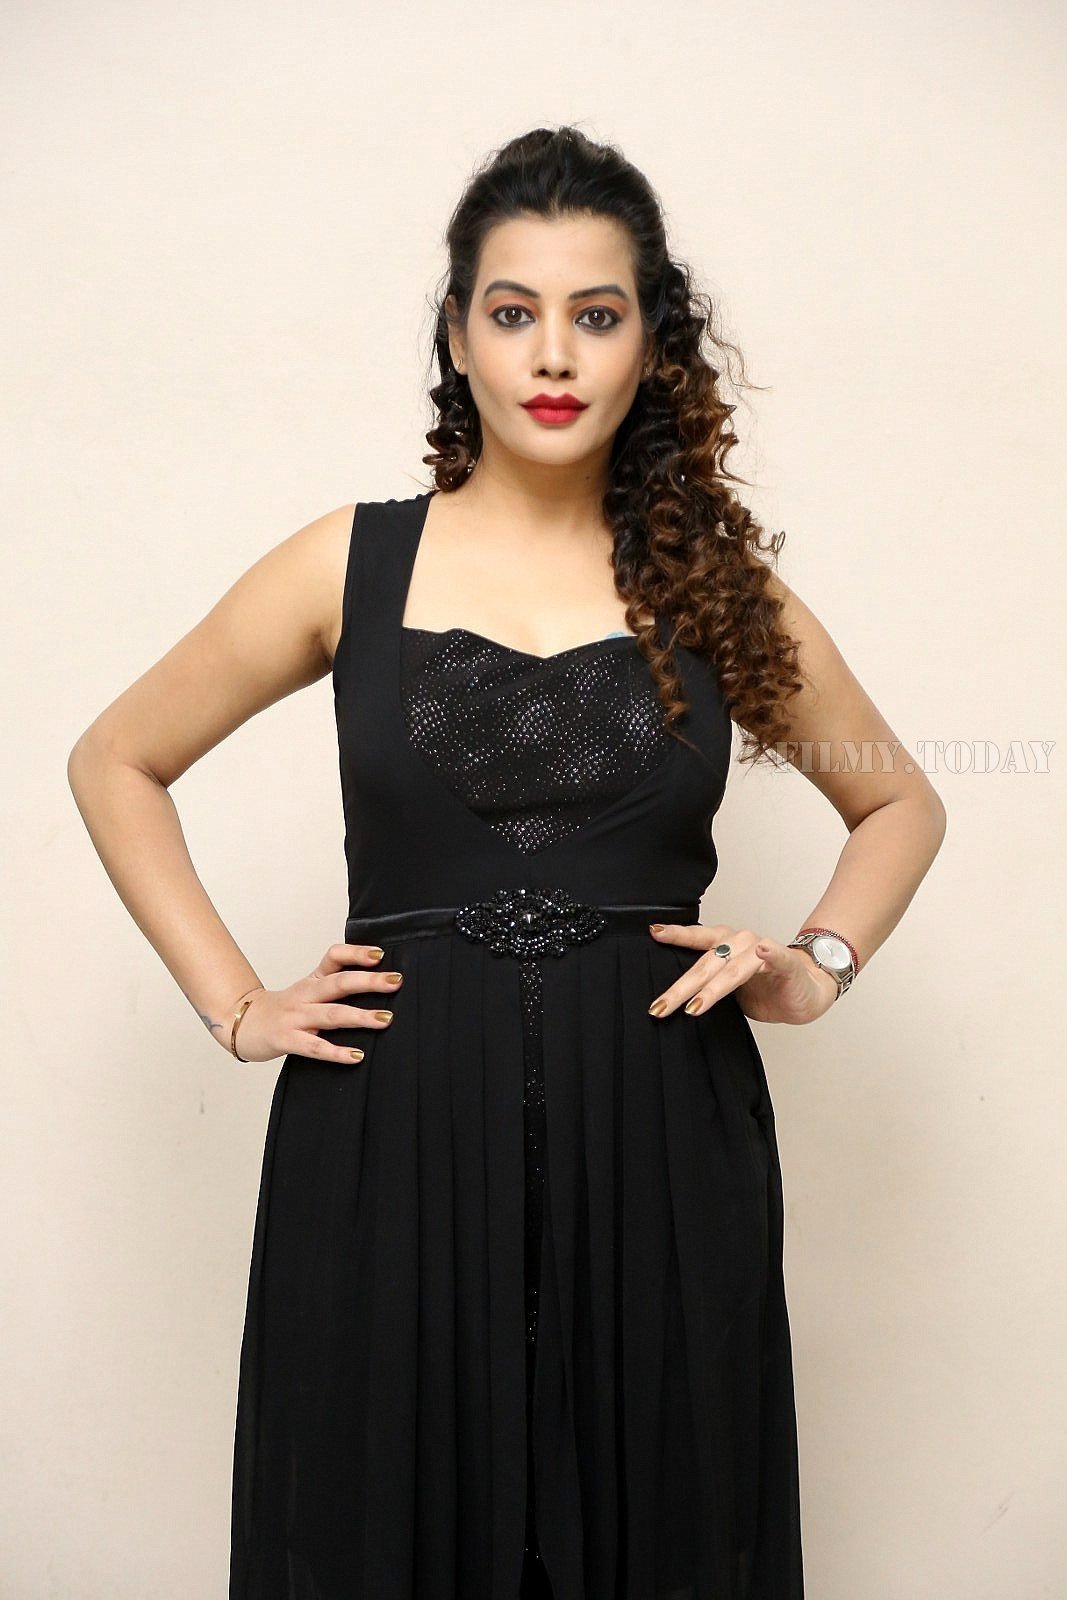 Actress Deeksha Panth Hot Stills at Operation 2019 First Look Launch | Picture 1561728